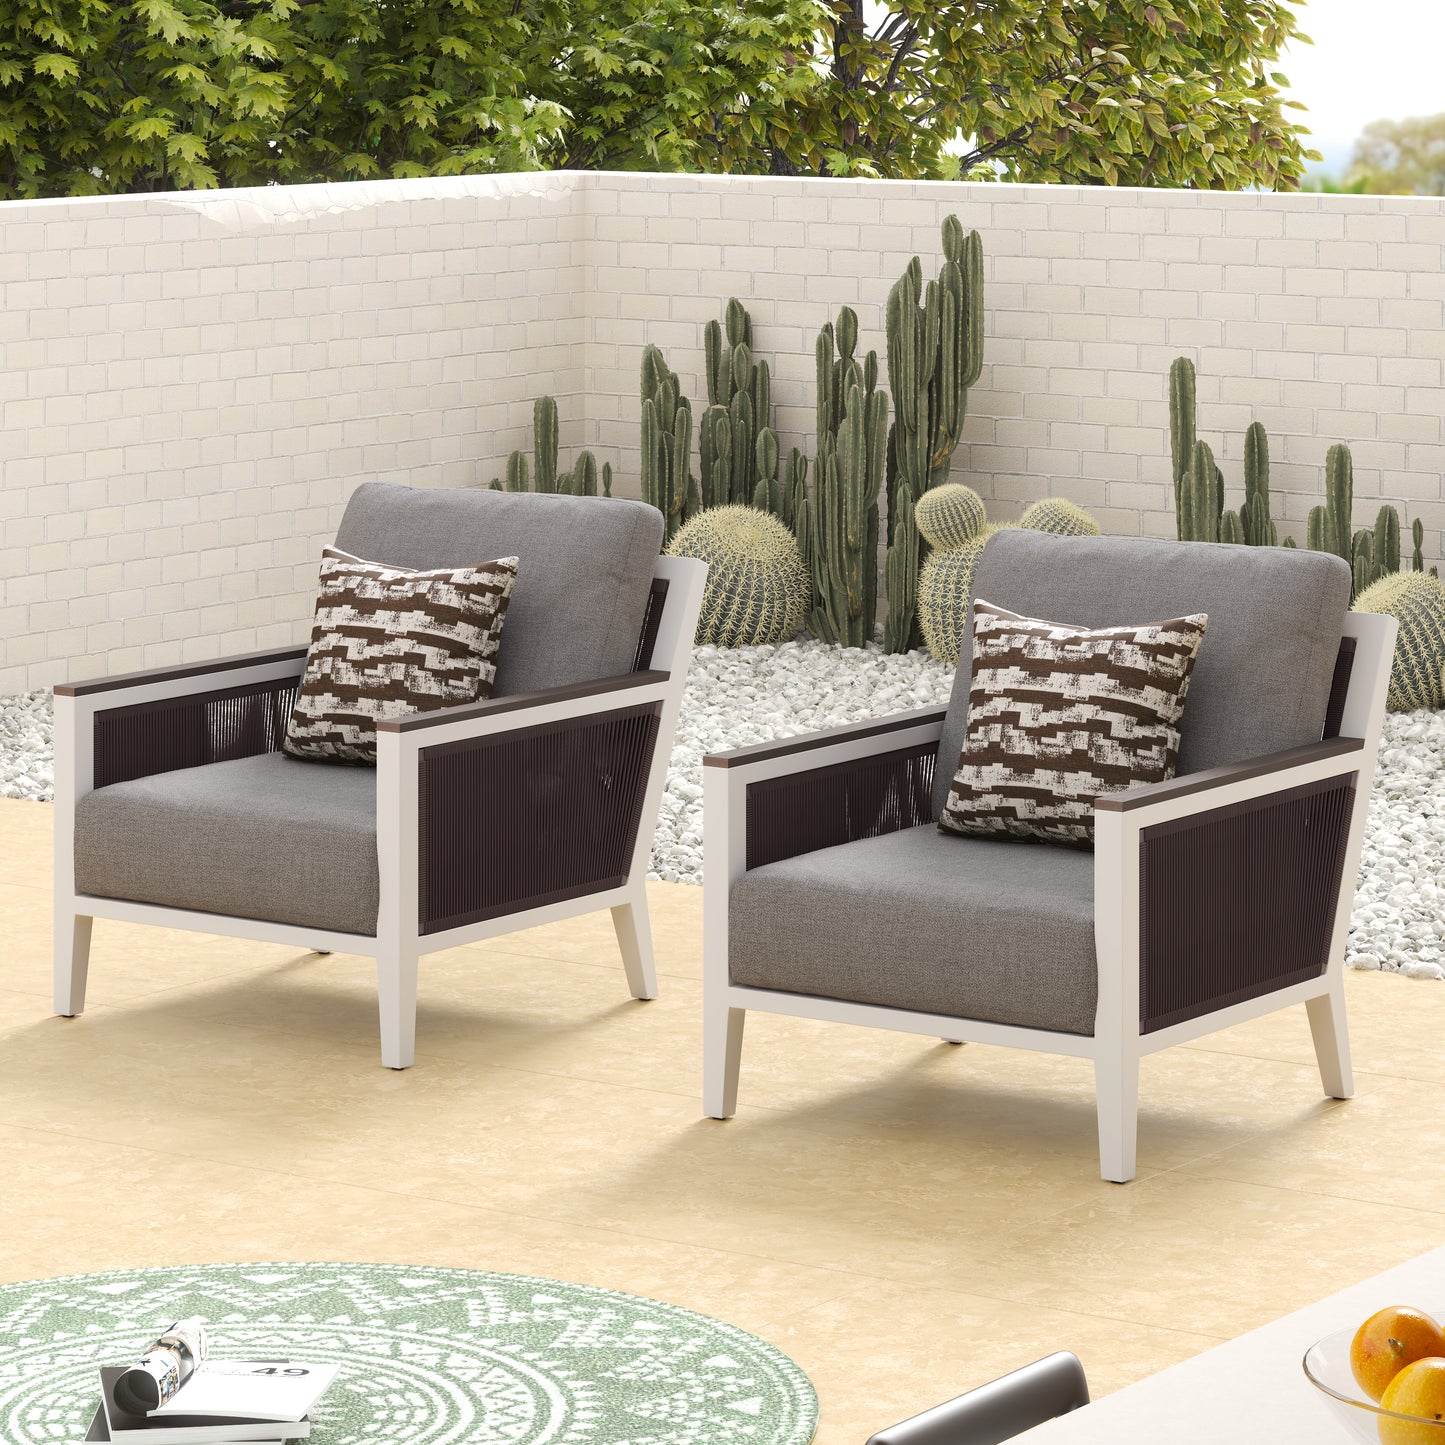 Outdoor Aluminum Club Chairs with Sunbrella Cushions ( Set of 2 )